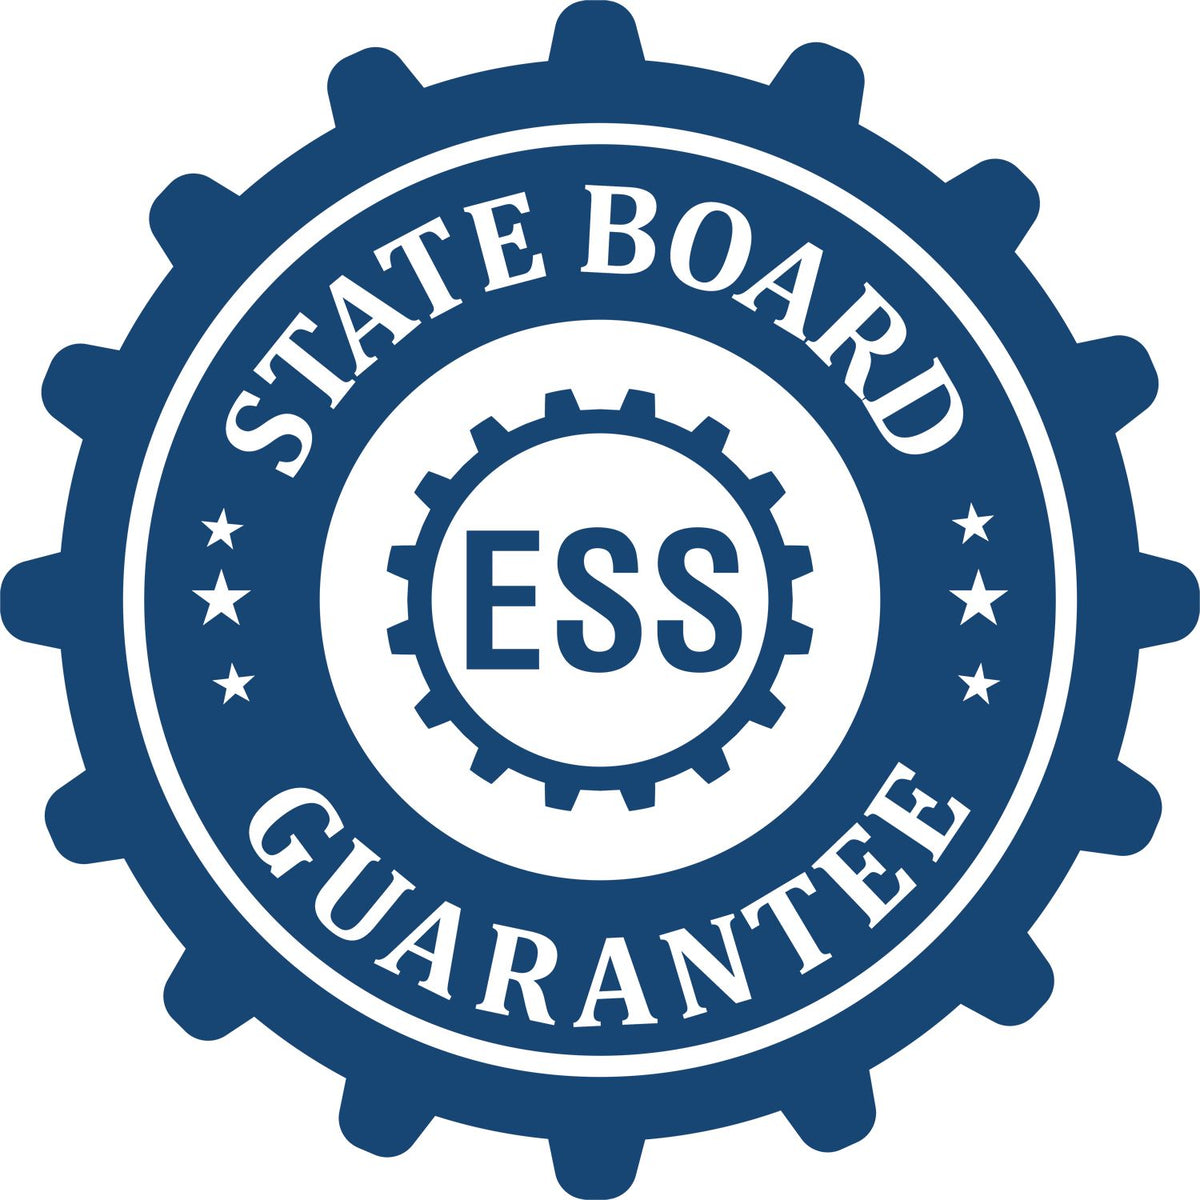 An emblem in a gear shape illustrating a state board guarantee for the Premium MaxLight Pre-Inked Indiana Landscape Architectural Stamp product.